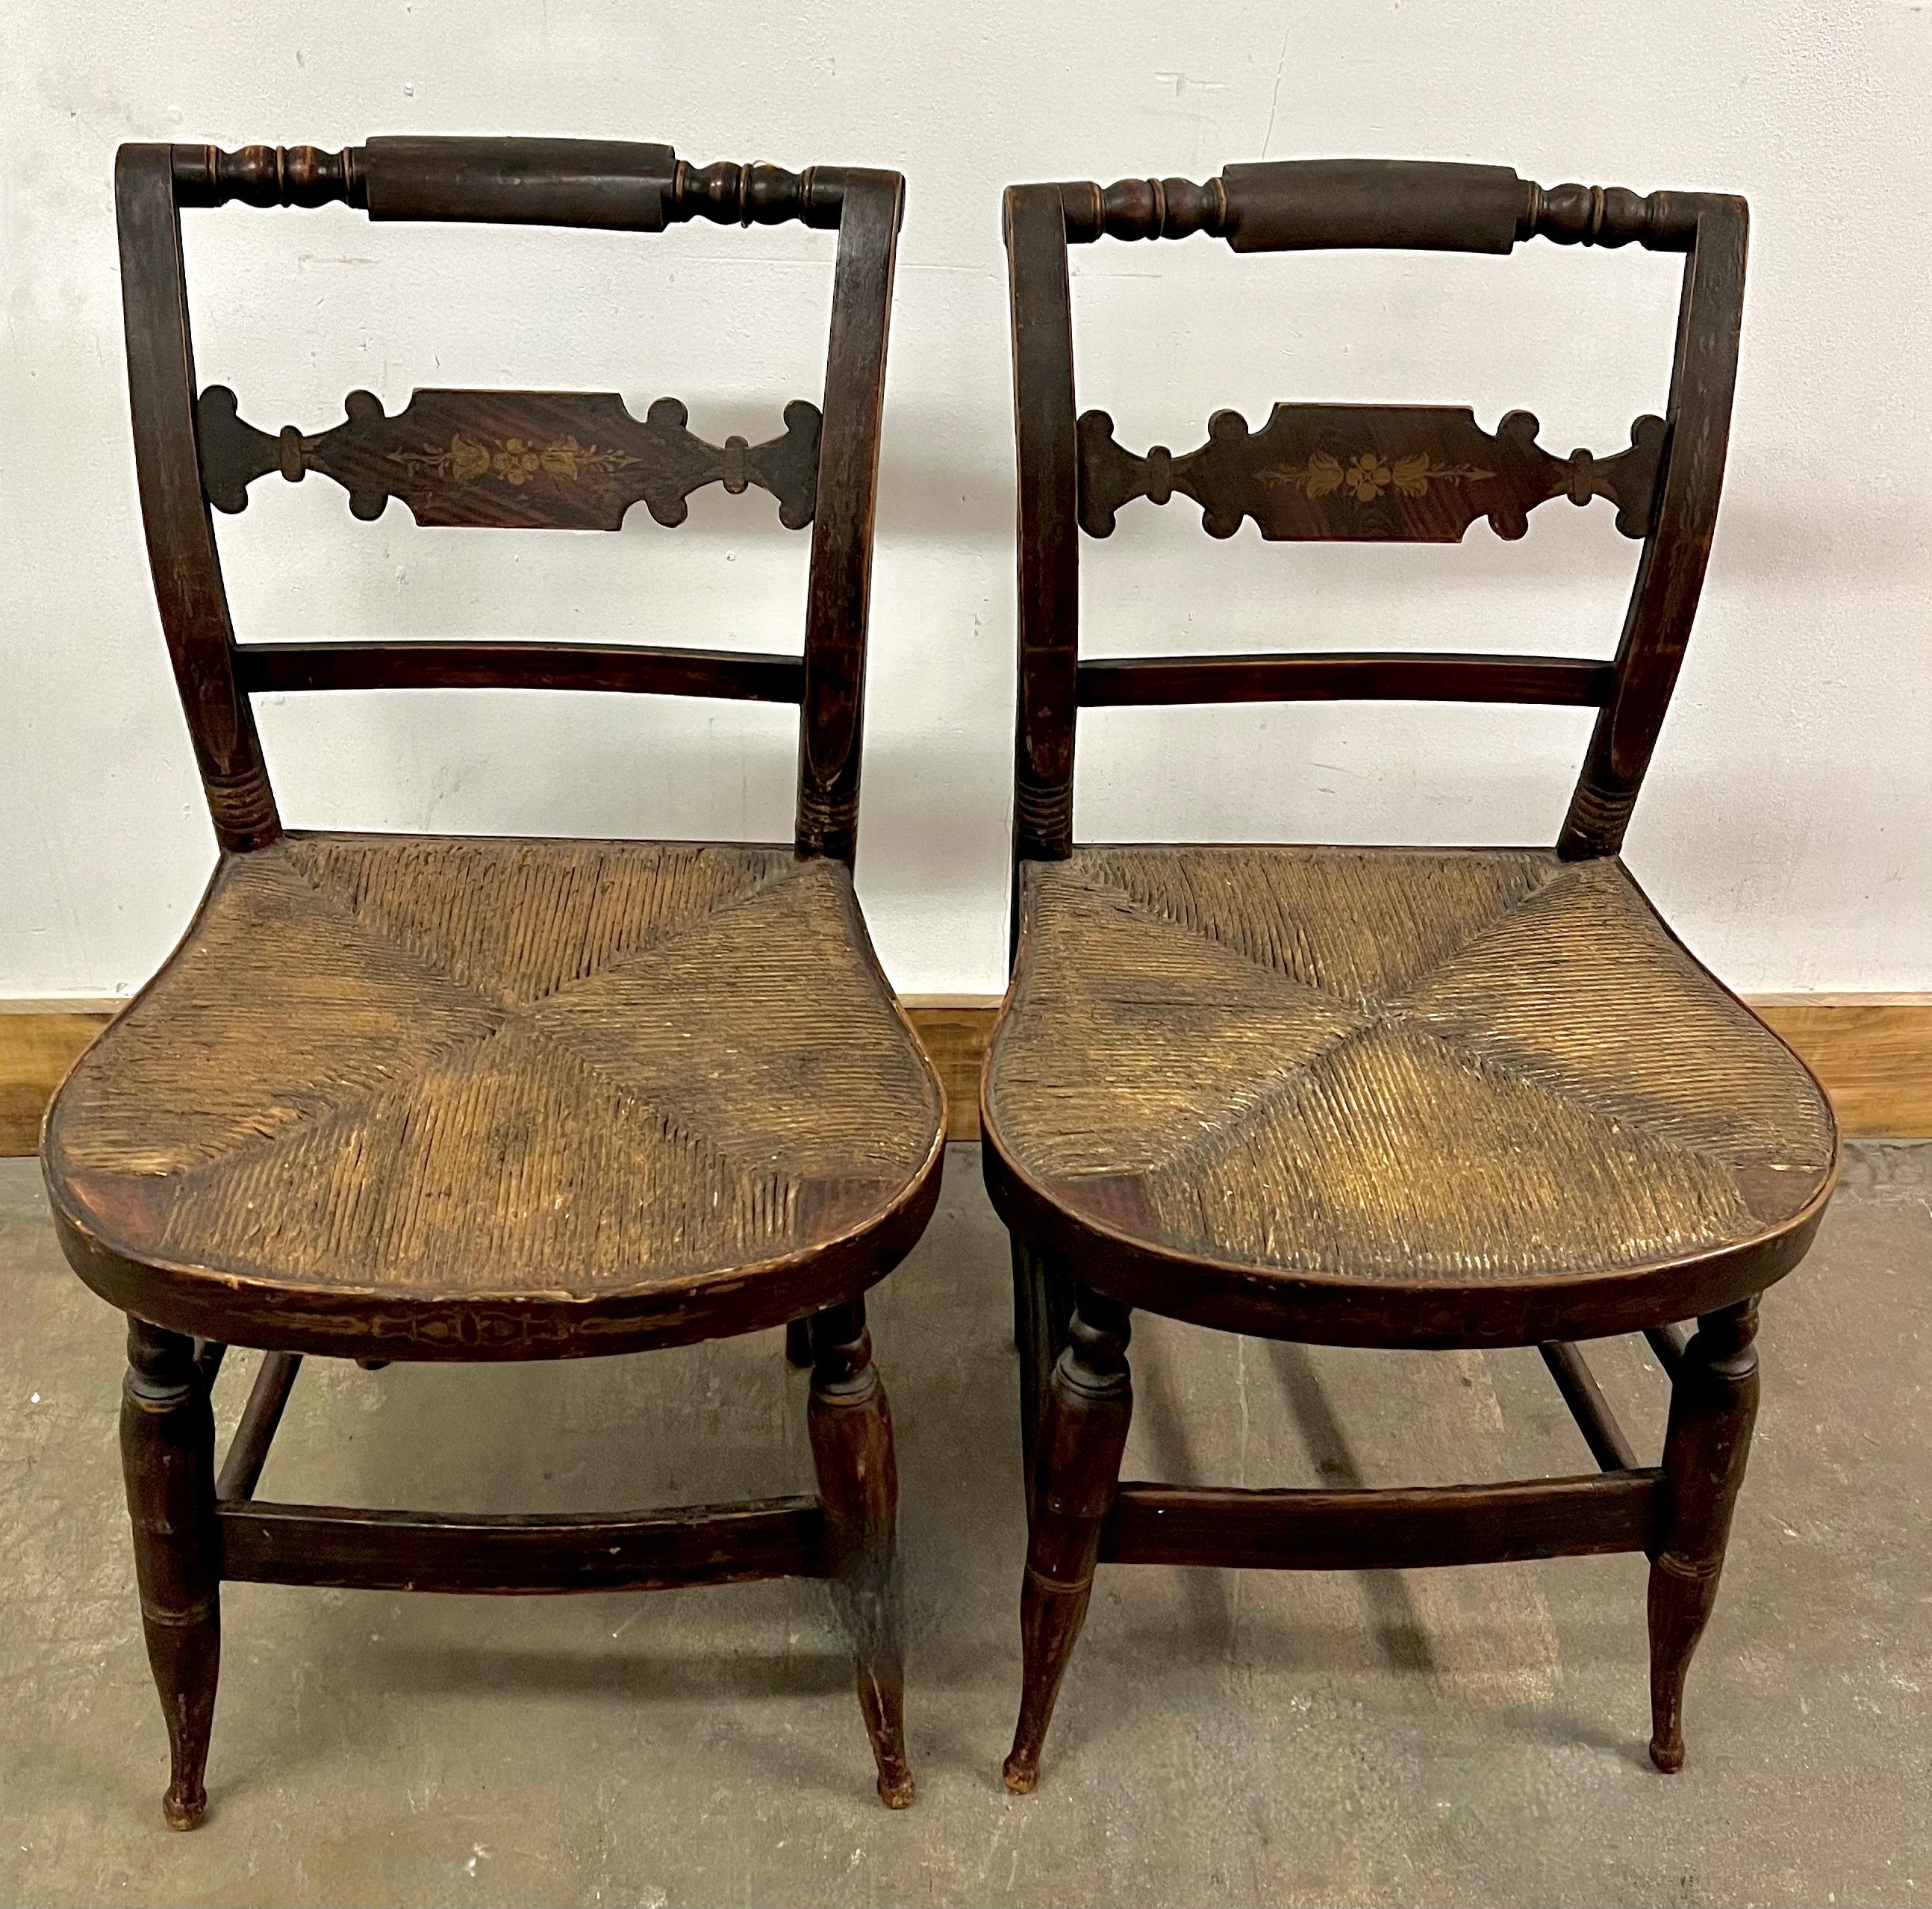 Pair of New England Hitchcock Style or Fancy chairs. Hand painted / stenciled with a deep and rich patination from years of good wear. The seats are woven rush seats and are in very good condition. 

A compliment to many spaces, around a table or